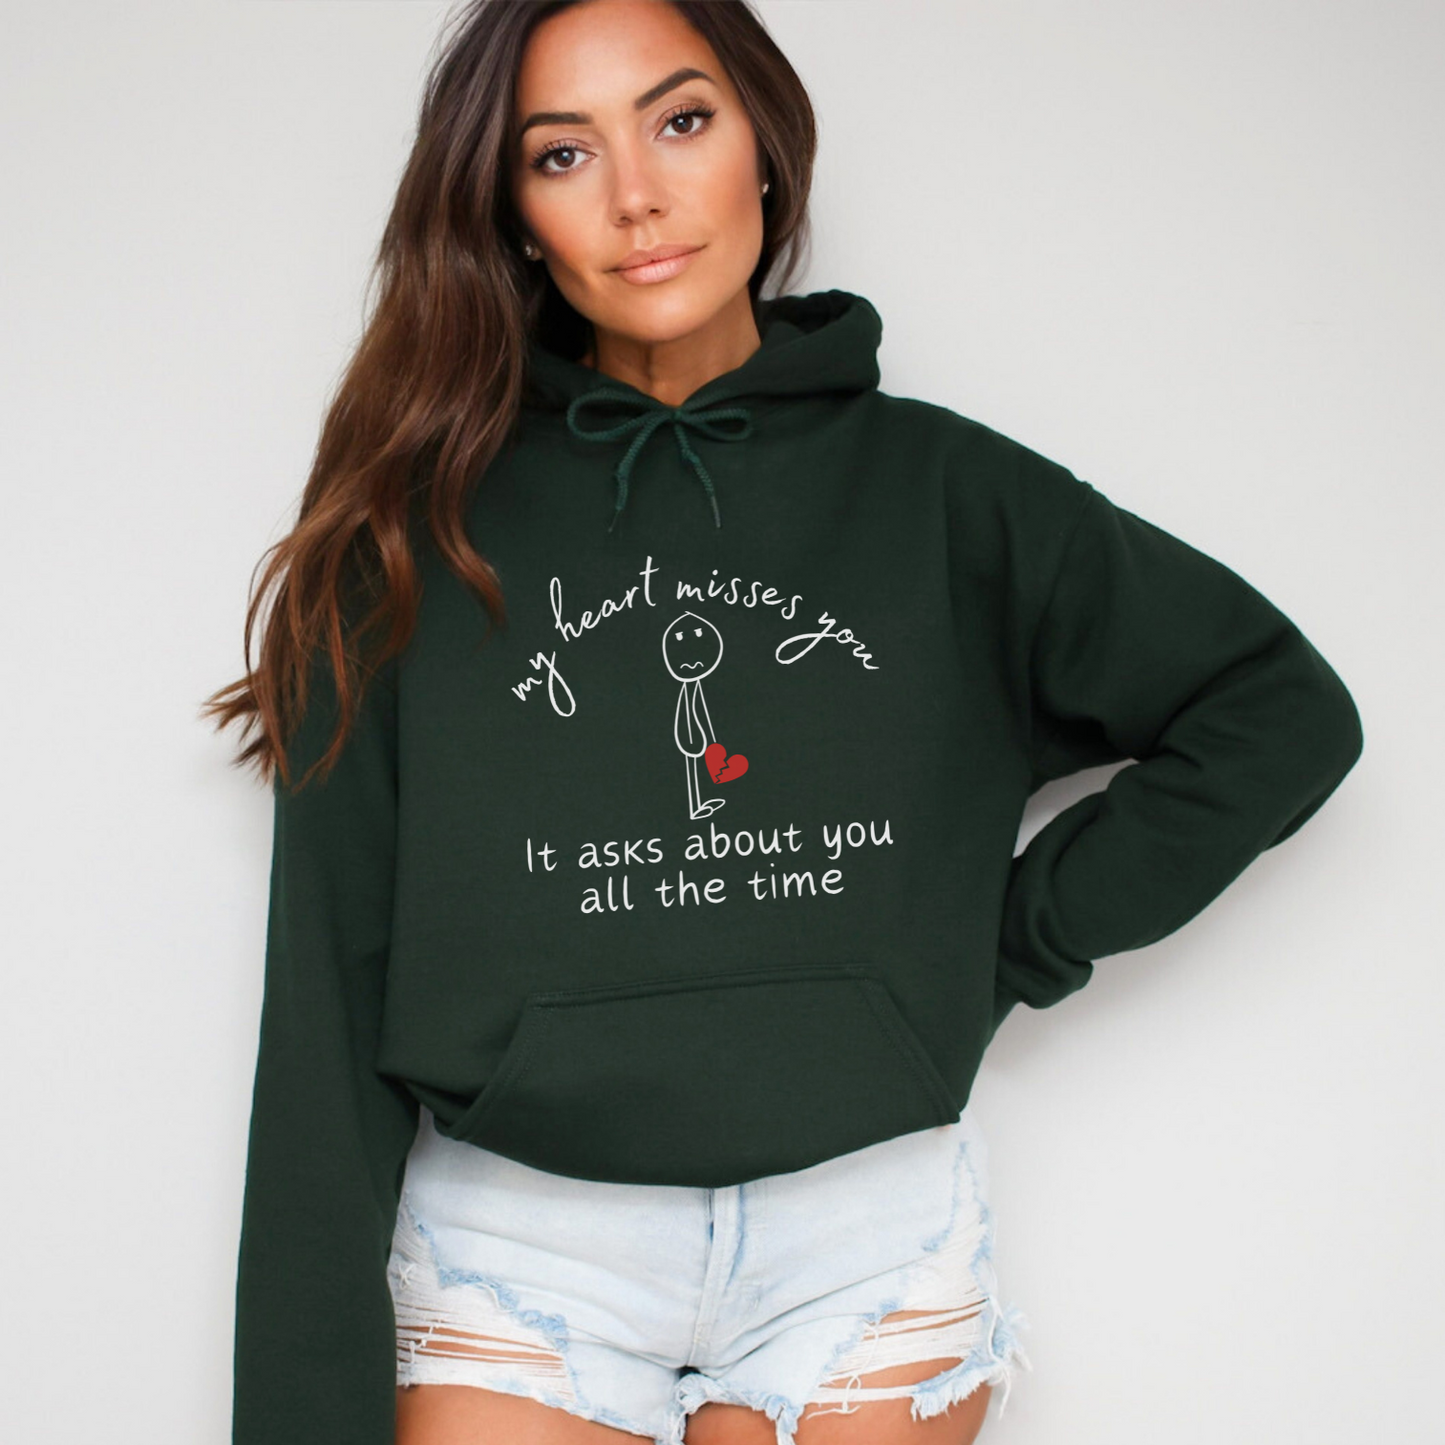 Forest Green hoodie sweatshirt - a warm embrace for those grieving a loss. "My heart misses you, it asks about you all the time" with a lonely stick figure with a broken heart.